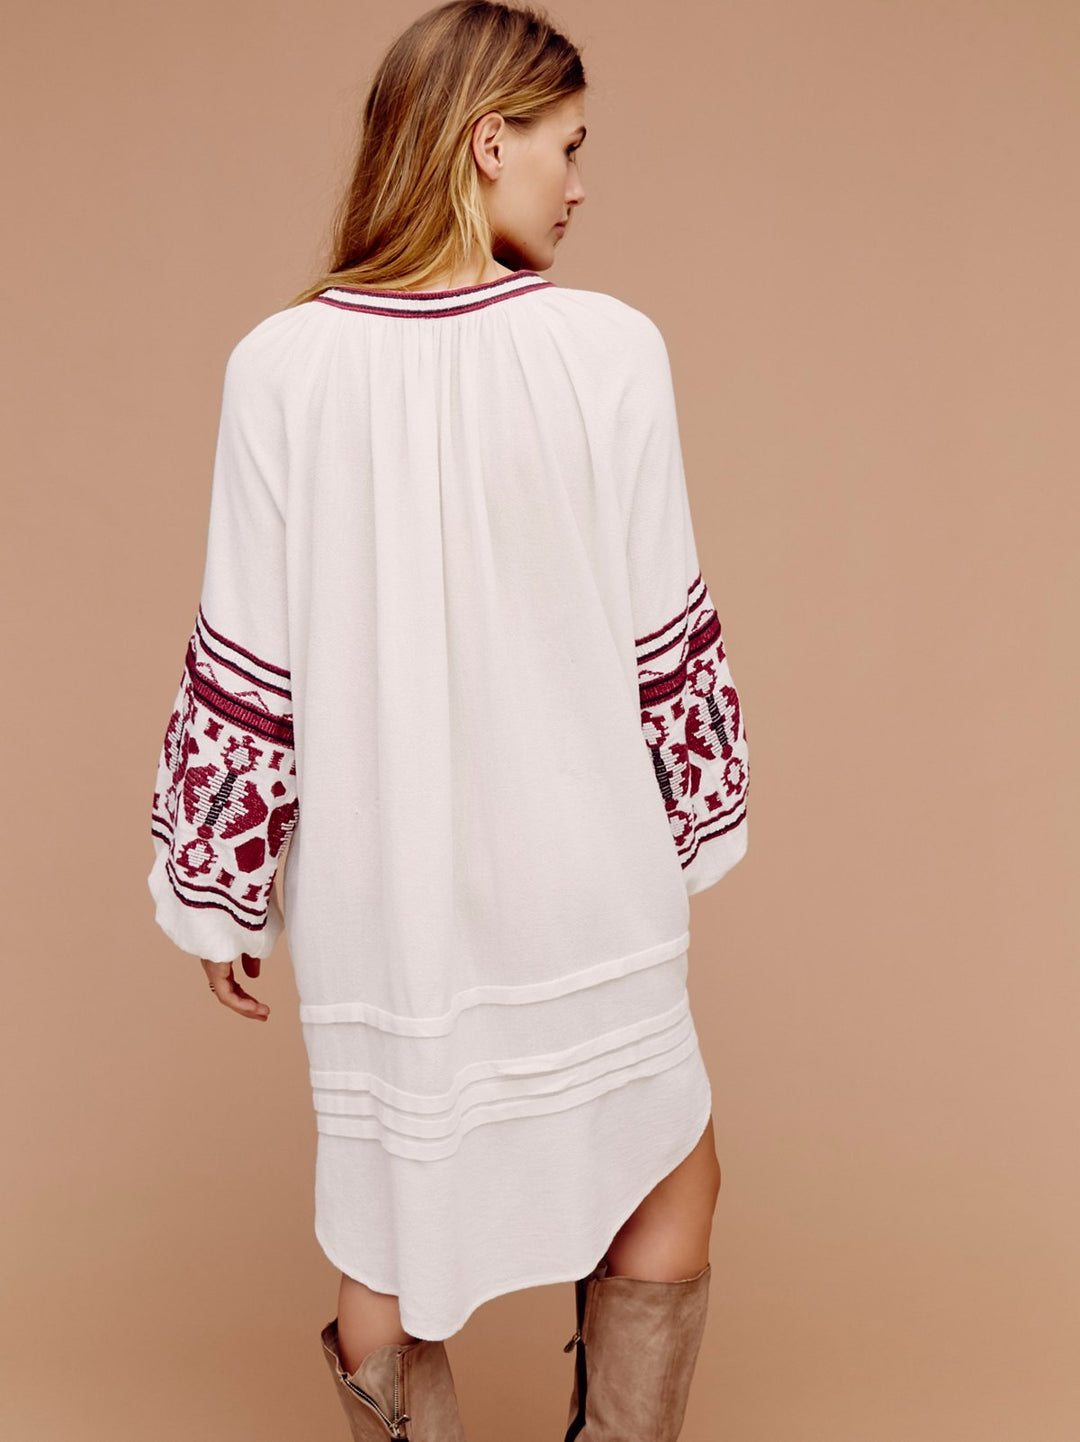 Women  Spring and Autumn Bohemian Holiday Ethnic Embroidered Loose Cardigan Dress